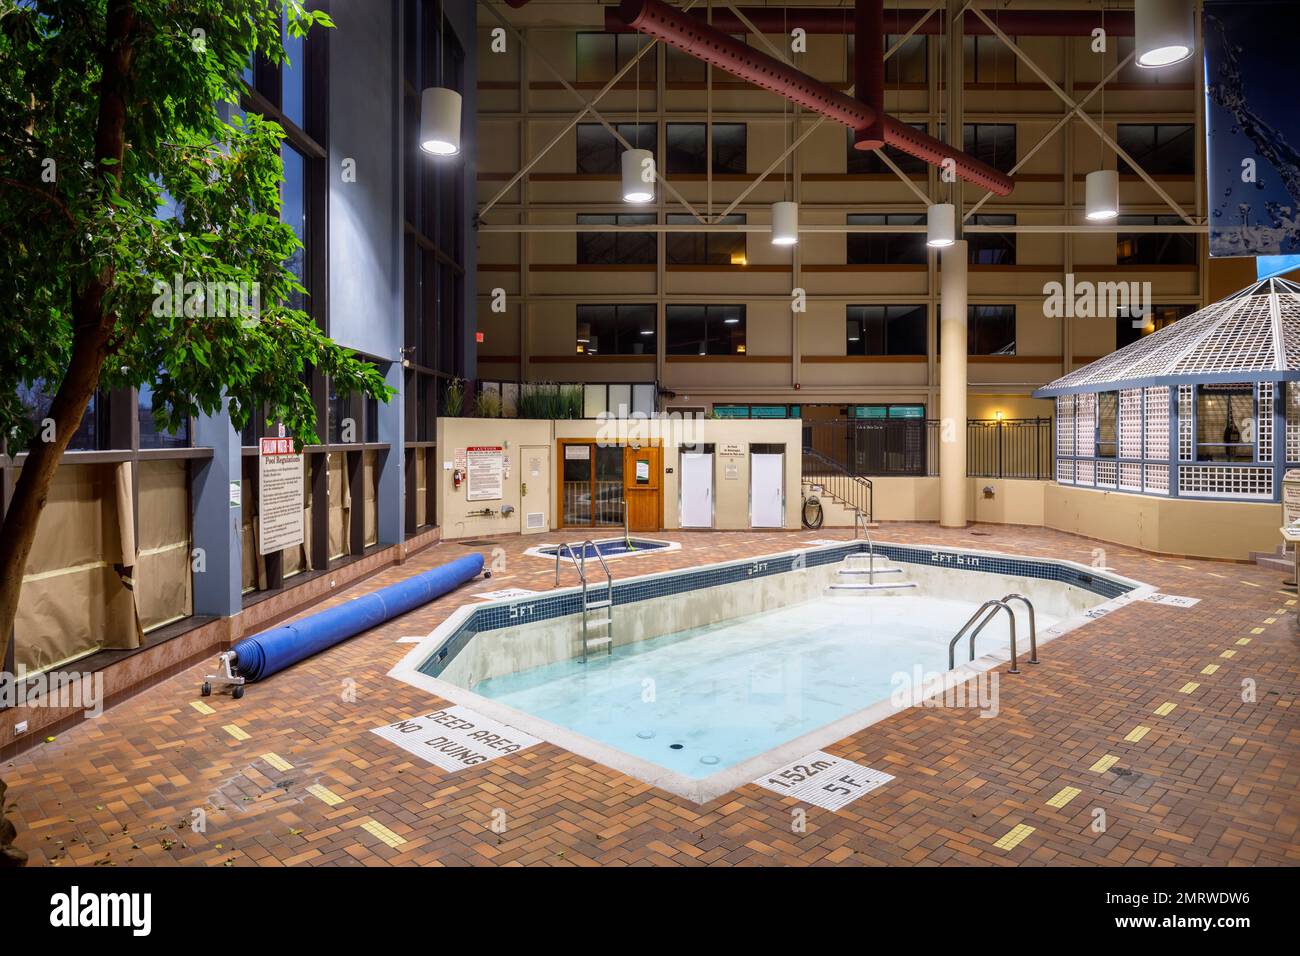 The indoor swimming pool at the now demolished Holiday Inn Yorkdale Hotel in Toronto, Ontario, Canada. This building is now demolished. Stock Photo